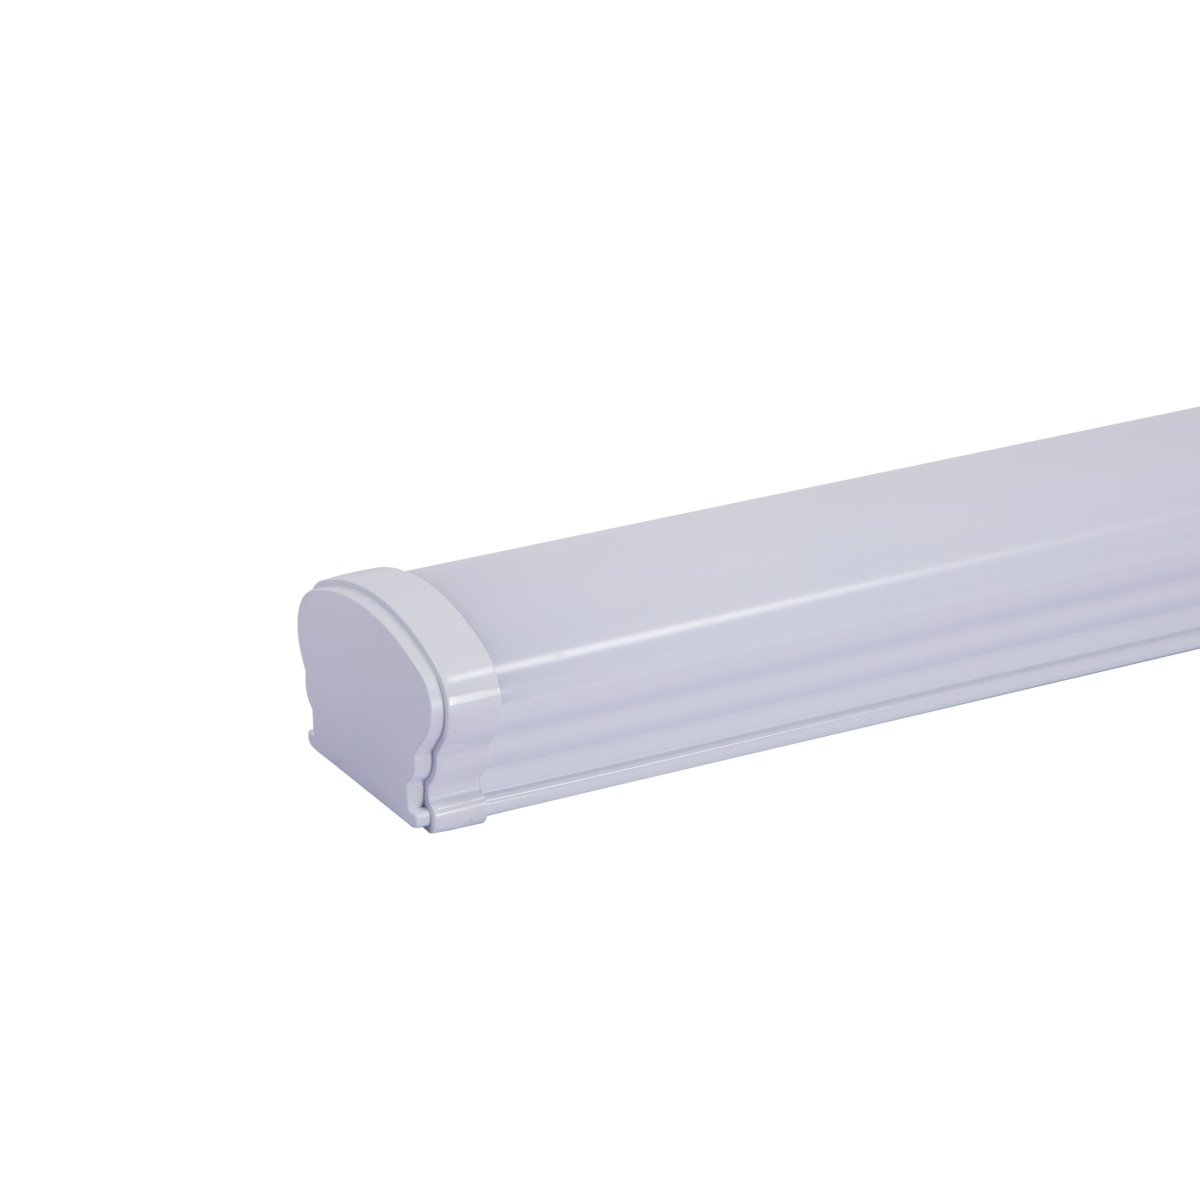 Main image of LED Tri-proof Batten Linear Fitting 54W 5000K Cool White IP65 150cm 5ft